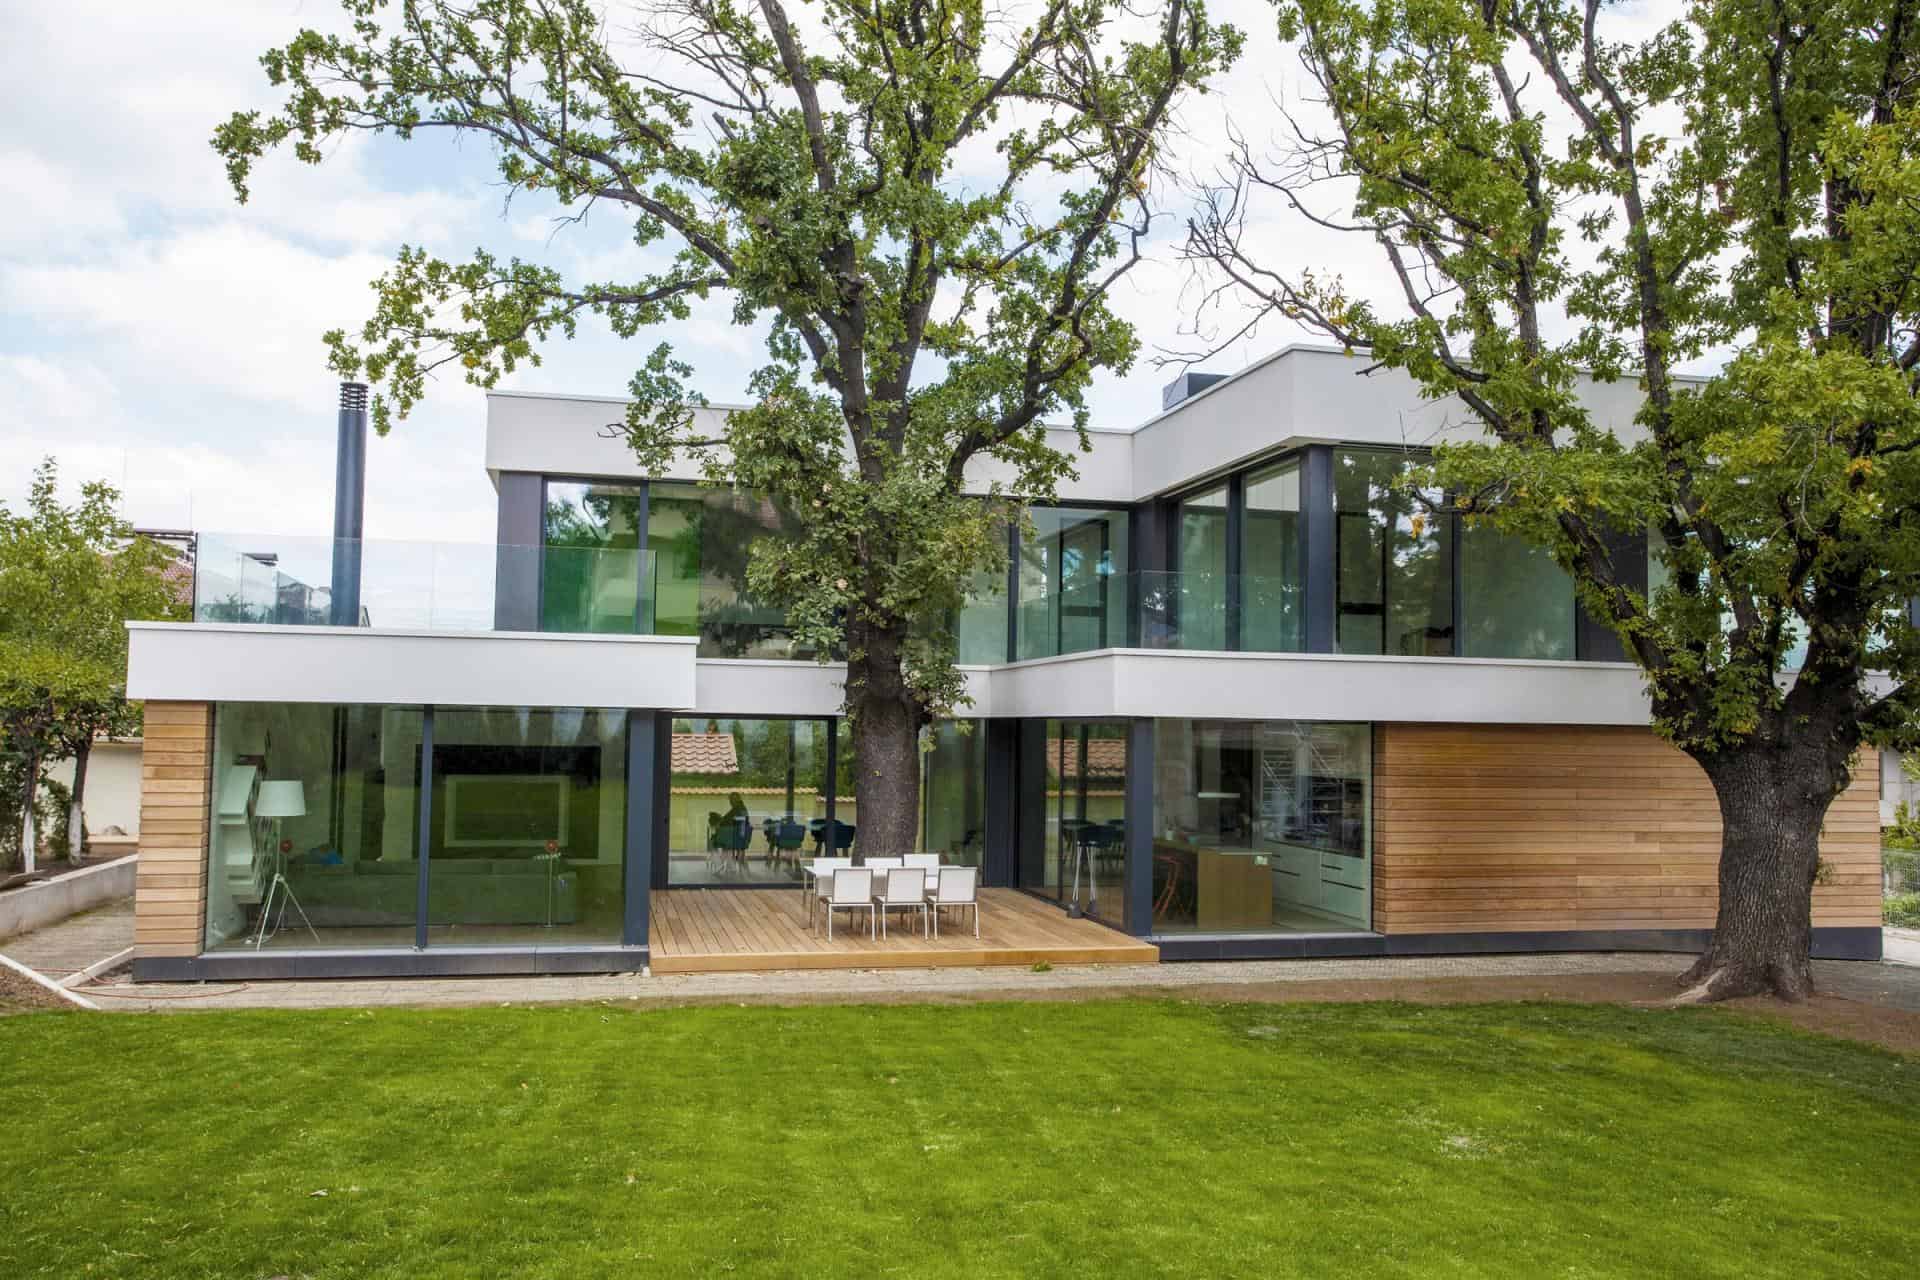 Home Incorporates Thermal Balance of 2 Oak Trees in Design